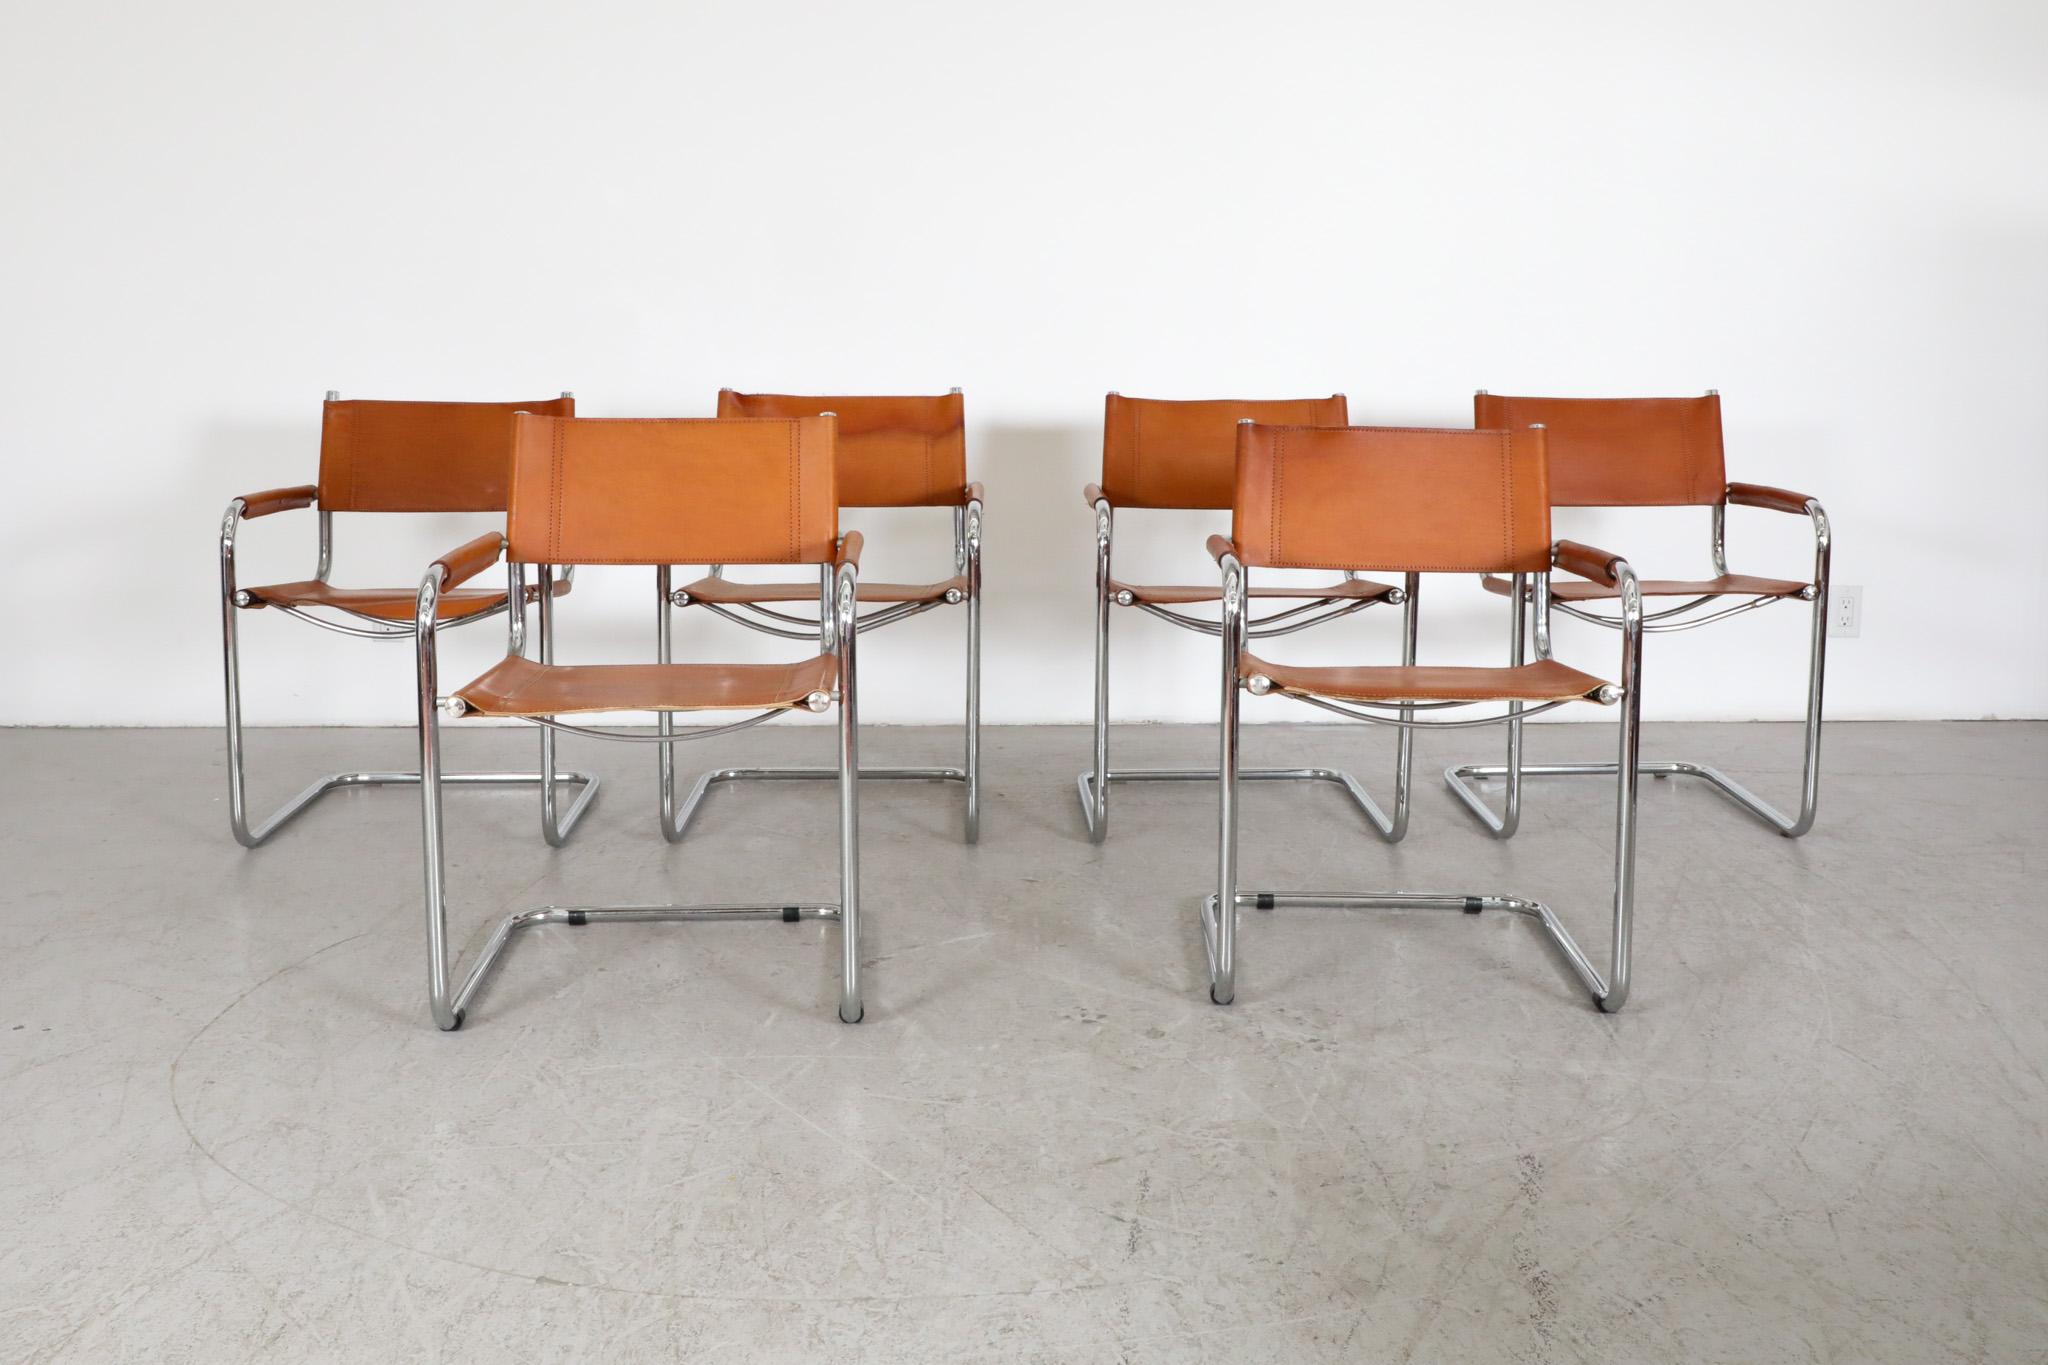 Set of 6 leather chairs by Mart Stam for Thonet, 1926. These cantilever armchairs have chrome frames and leather arms, backs and seats. In original condition with visible wear, including heavy patina consistent with their age and use. Sold as a set